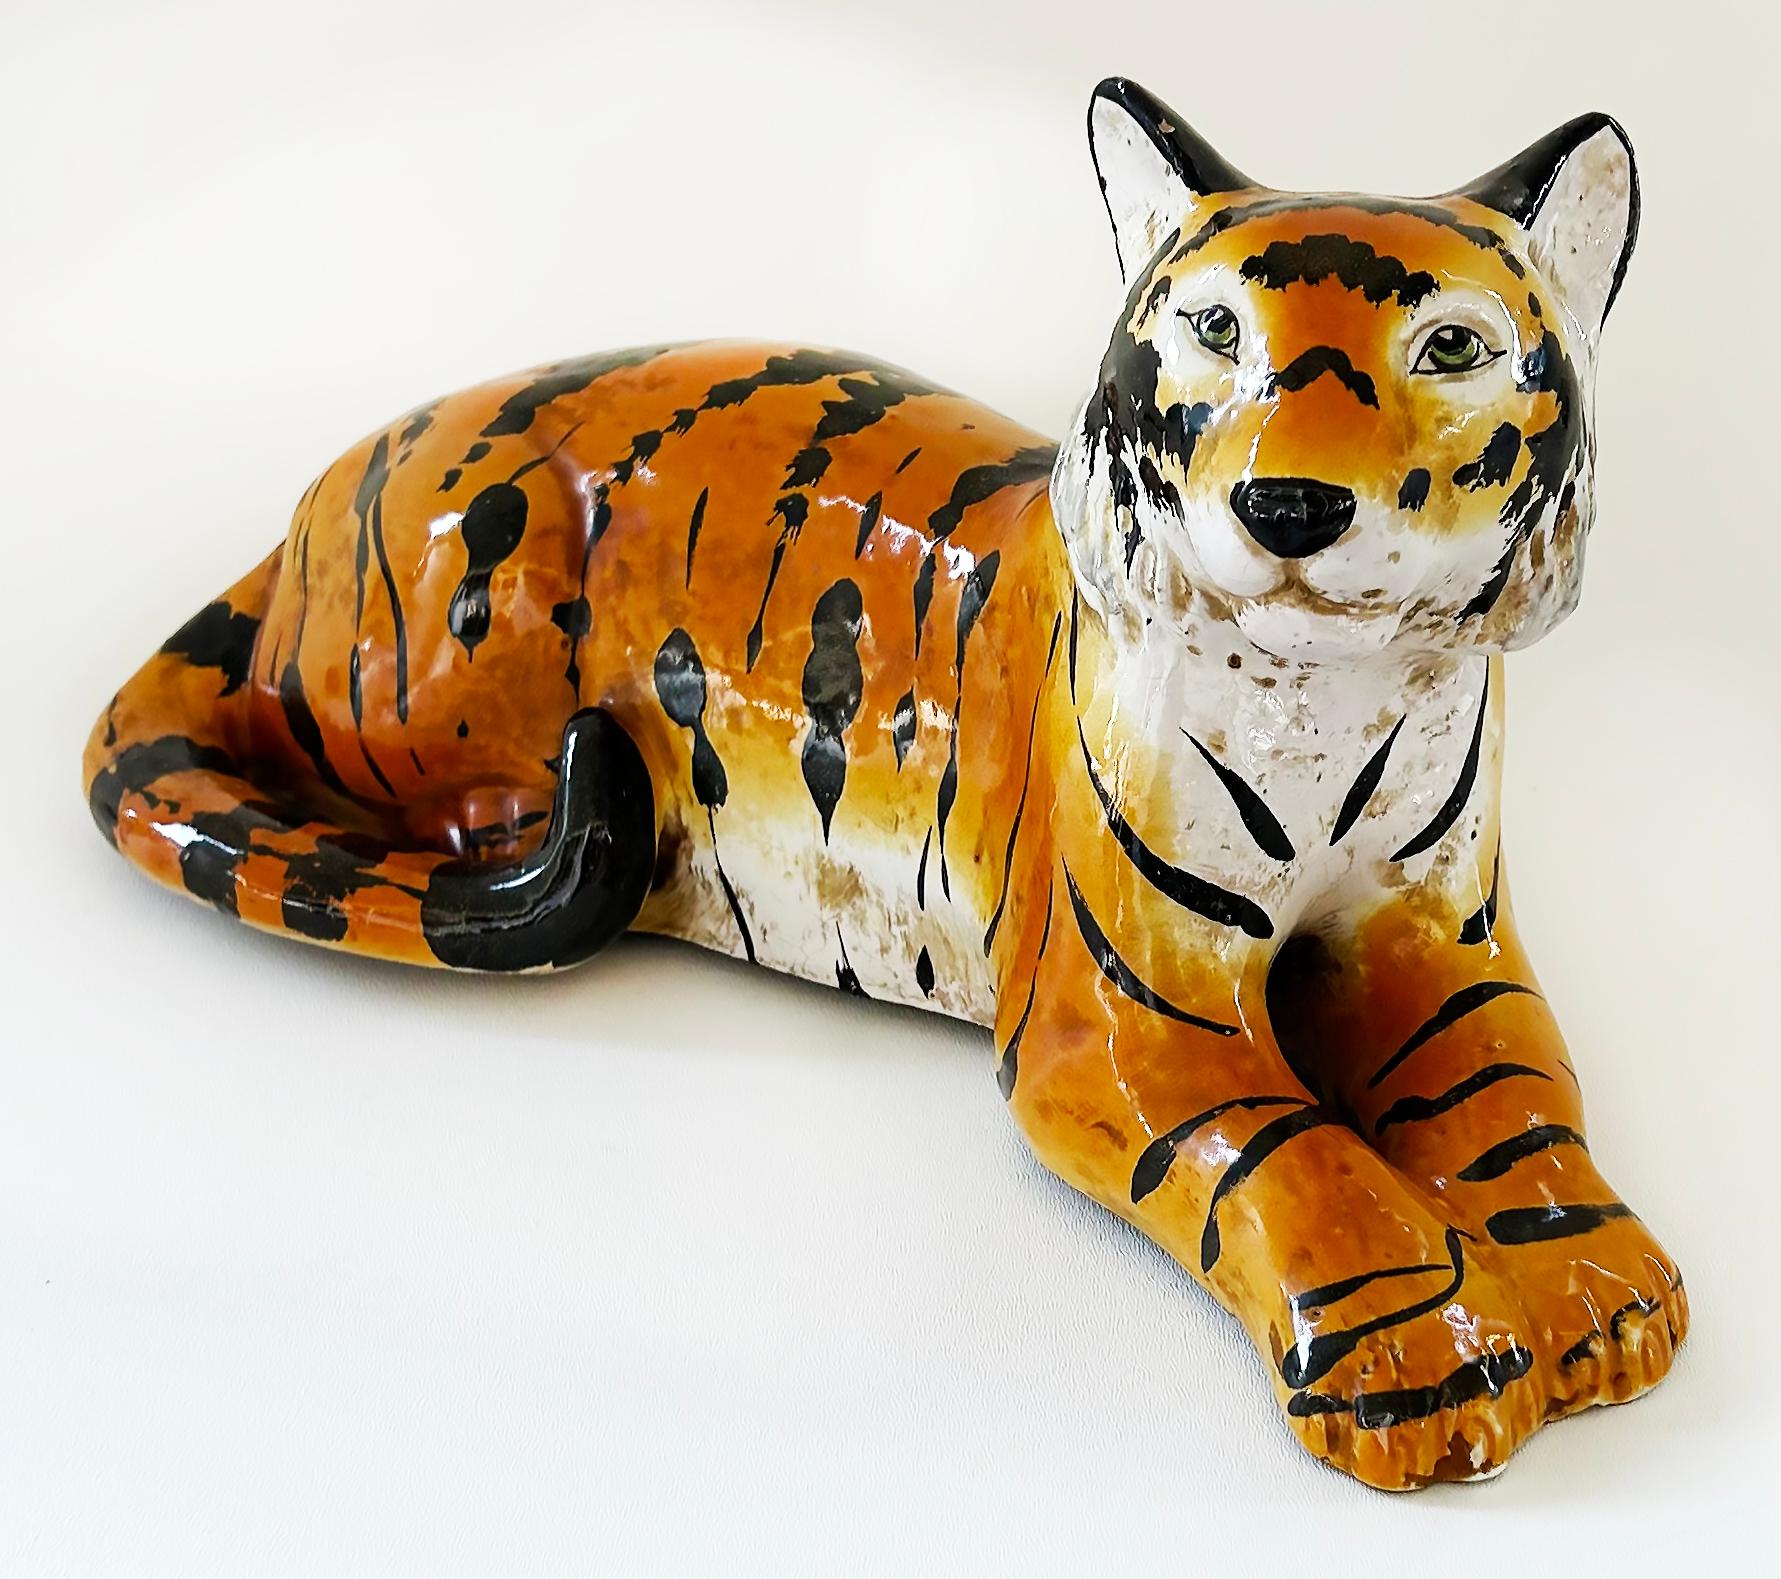 Italian Glazed Ceramic Sculpture of a Tiger in Repose, Circa 1960s

Offered for sale is an Italian glazed ceramic sculpture of a tiger in repose dating from the mid-late 20th century.  The tiger is beautifully hand-painted and glazed in striking